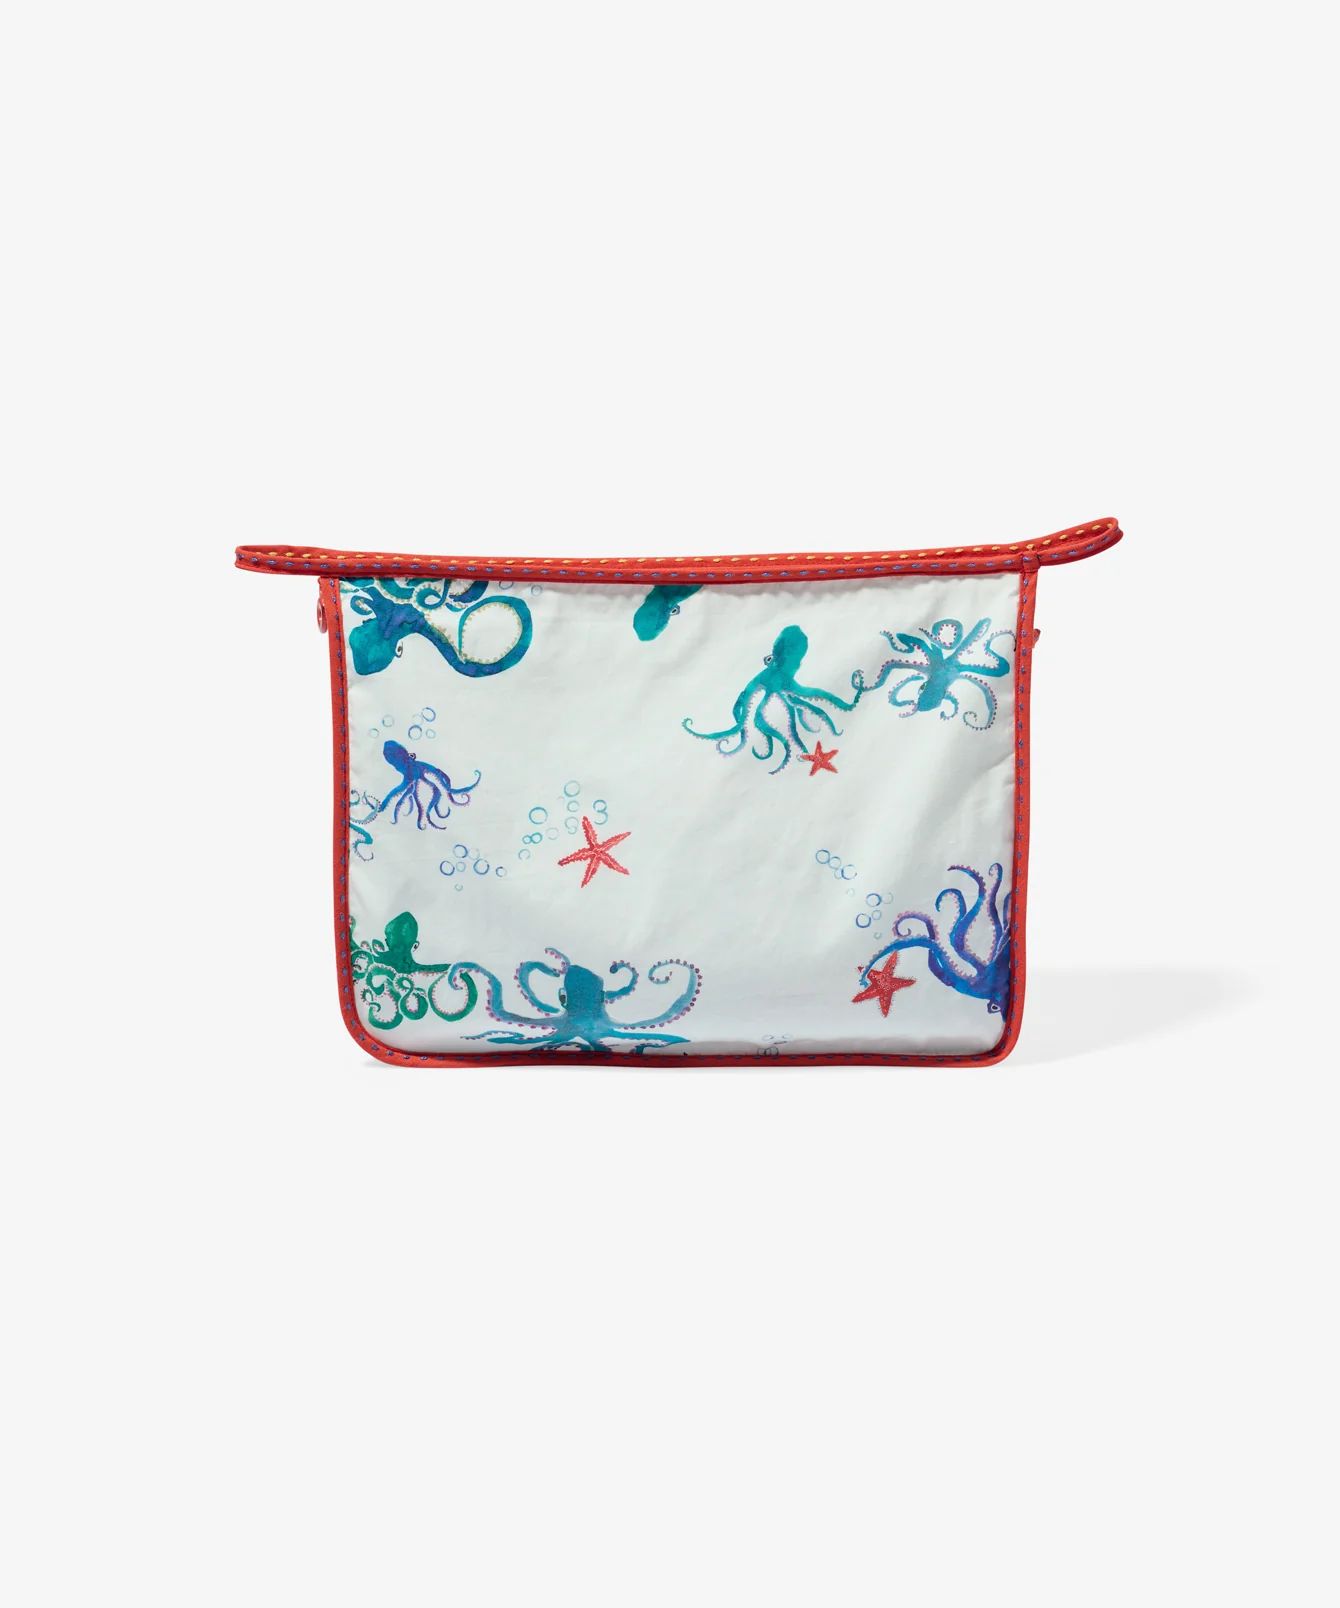 Large Zip Bag in Octopus Print | Oso and Me | Oso & Me